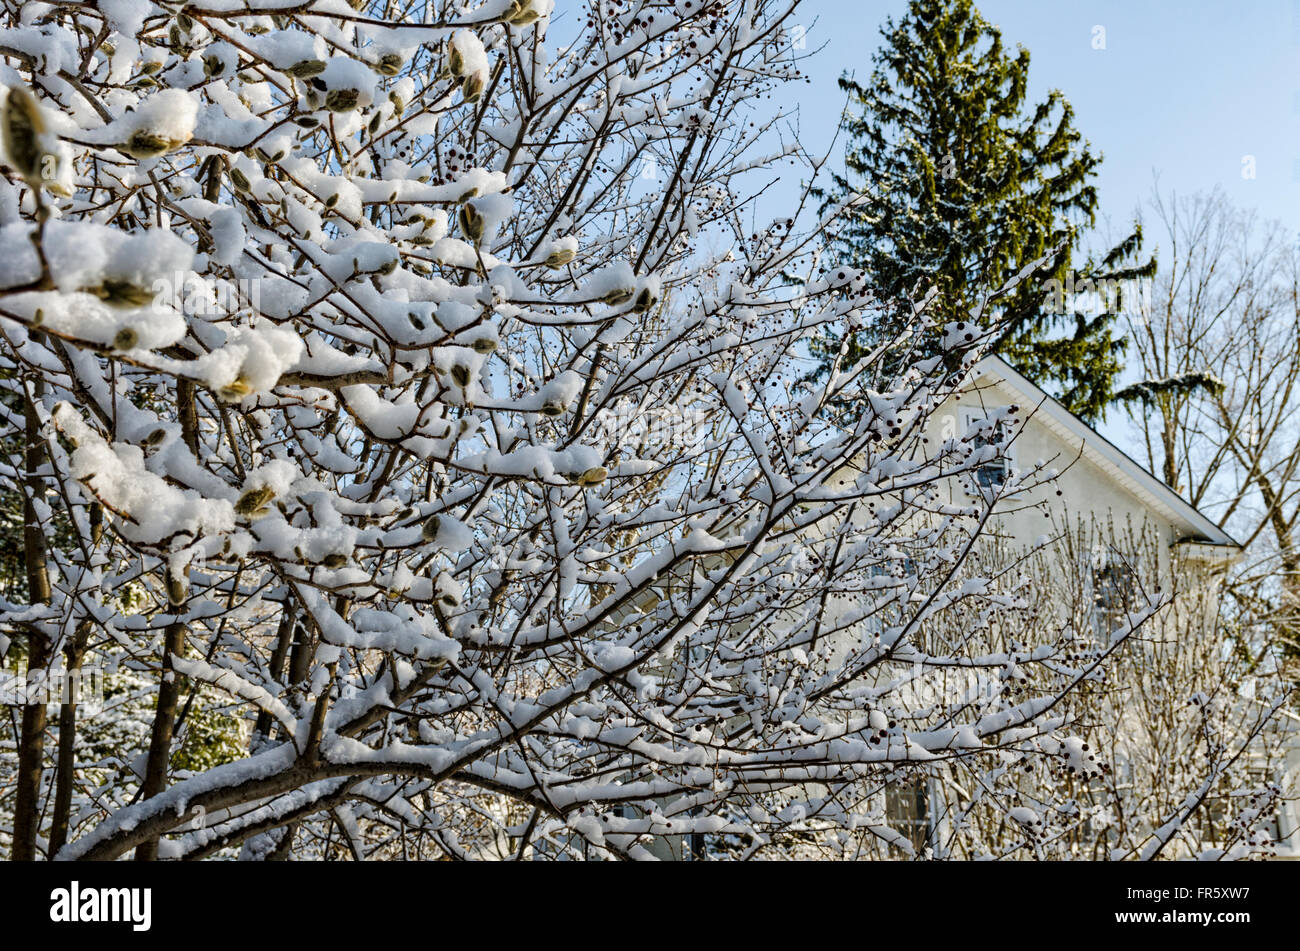 Chappaqua, New York, USA. 21st March, 2016. A snowstorm that hit the Northeastern United States on the first day of Spring blankets a backyard in suburban Westchester County, covering a star magnolia tree, Magnolia stellata, a  lilac tree, and other plants already starting to bud after a warm winter. Marianne A. Campolongo/Alamy Live News. Stock Photo